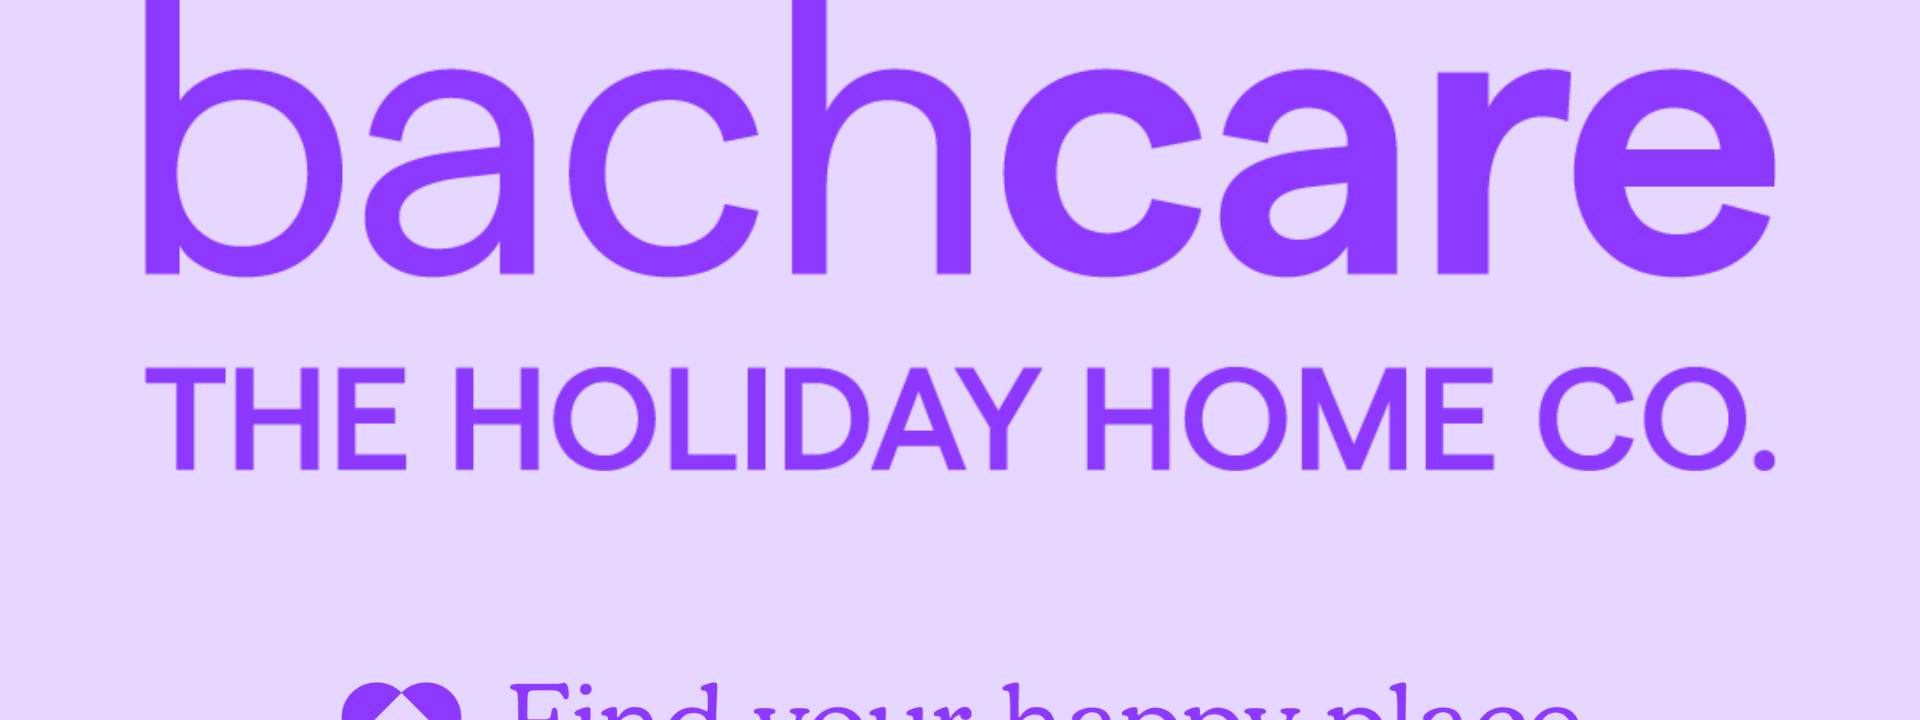 bachcare-logo-partner-site-gallery.png